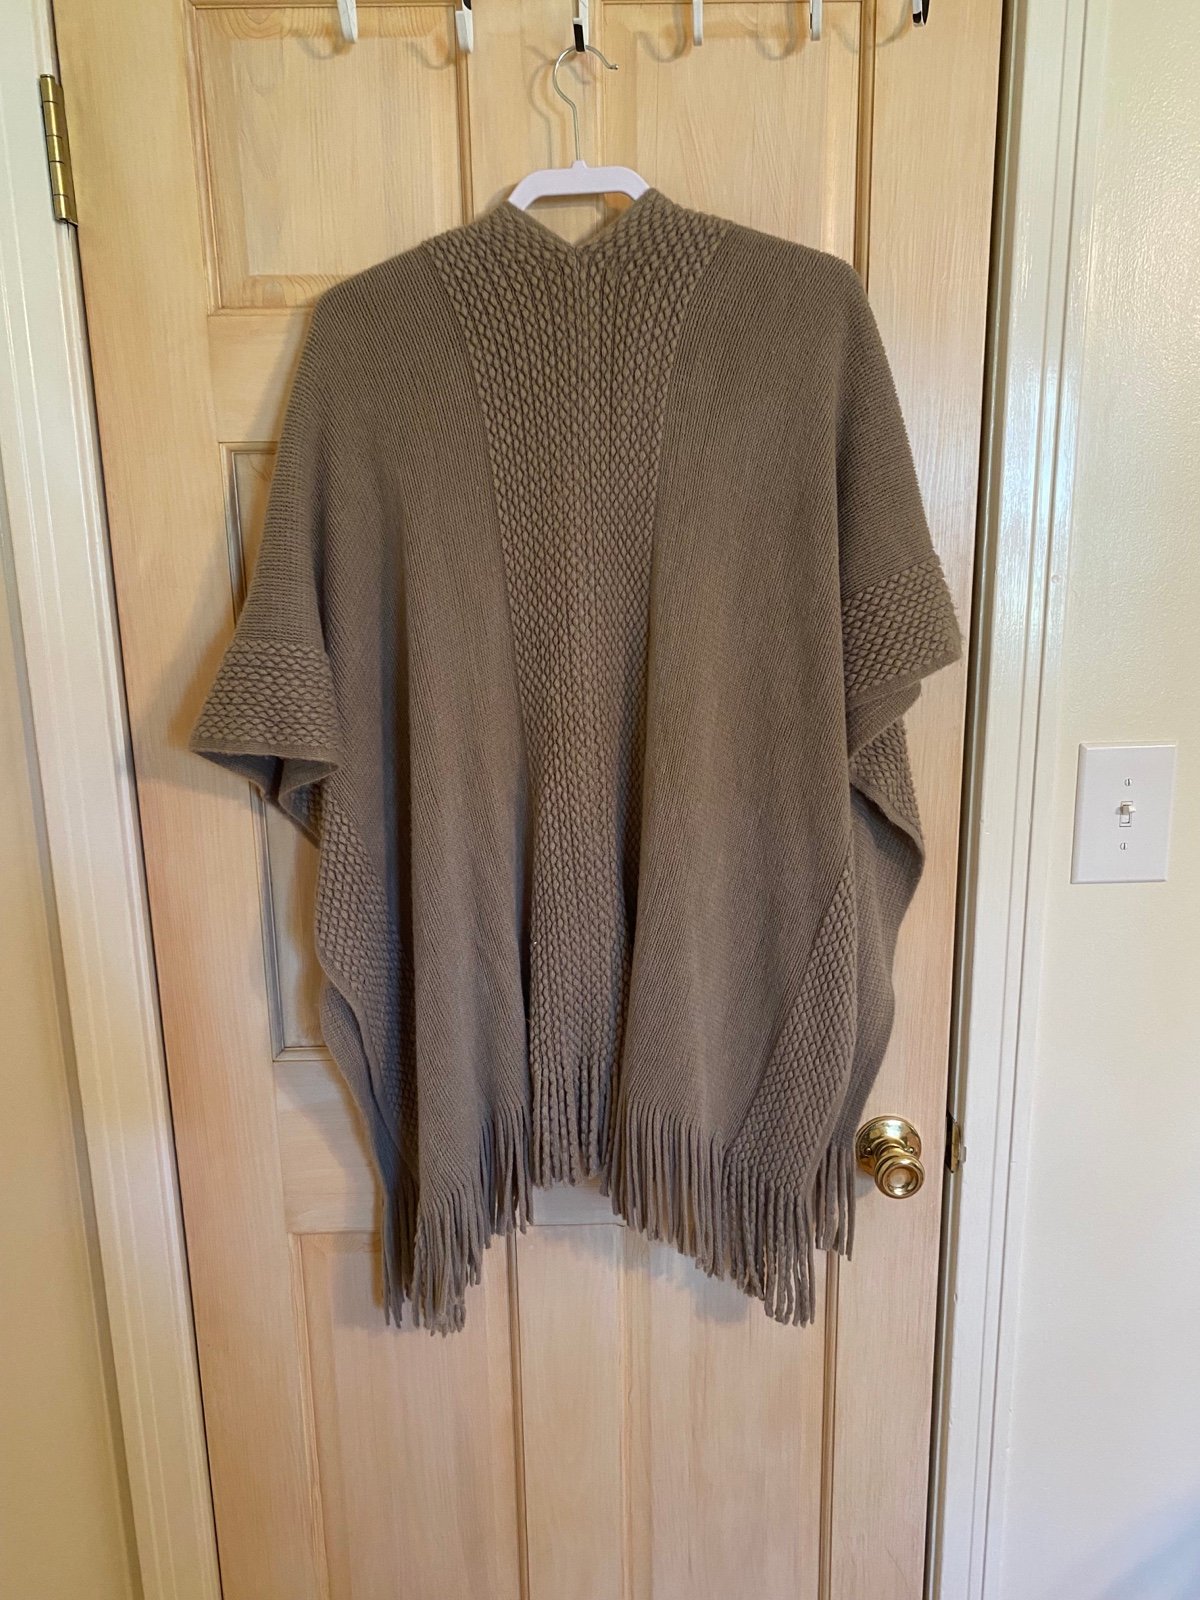 Beautiful Poncho sweater nz1Jzn7HF all for you